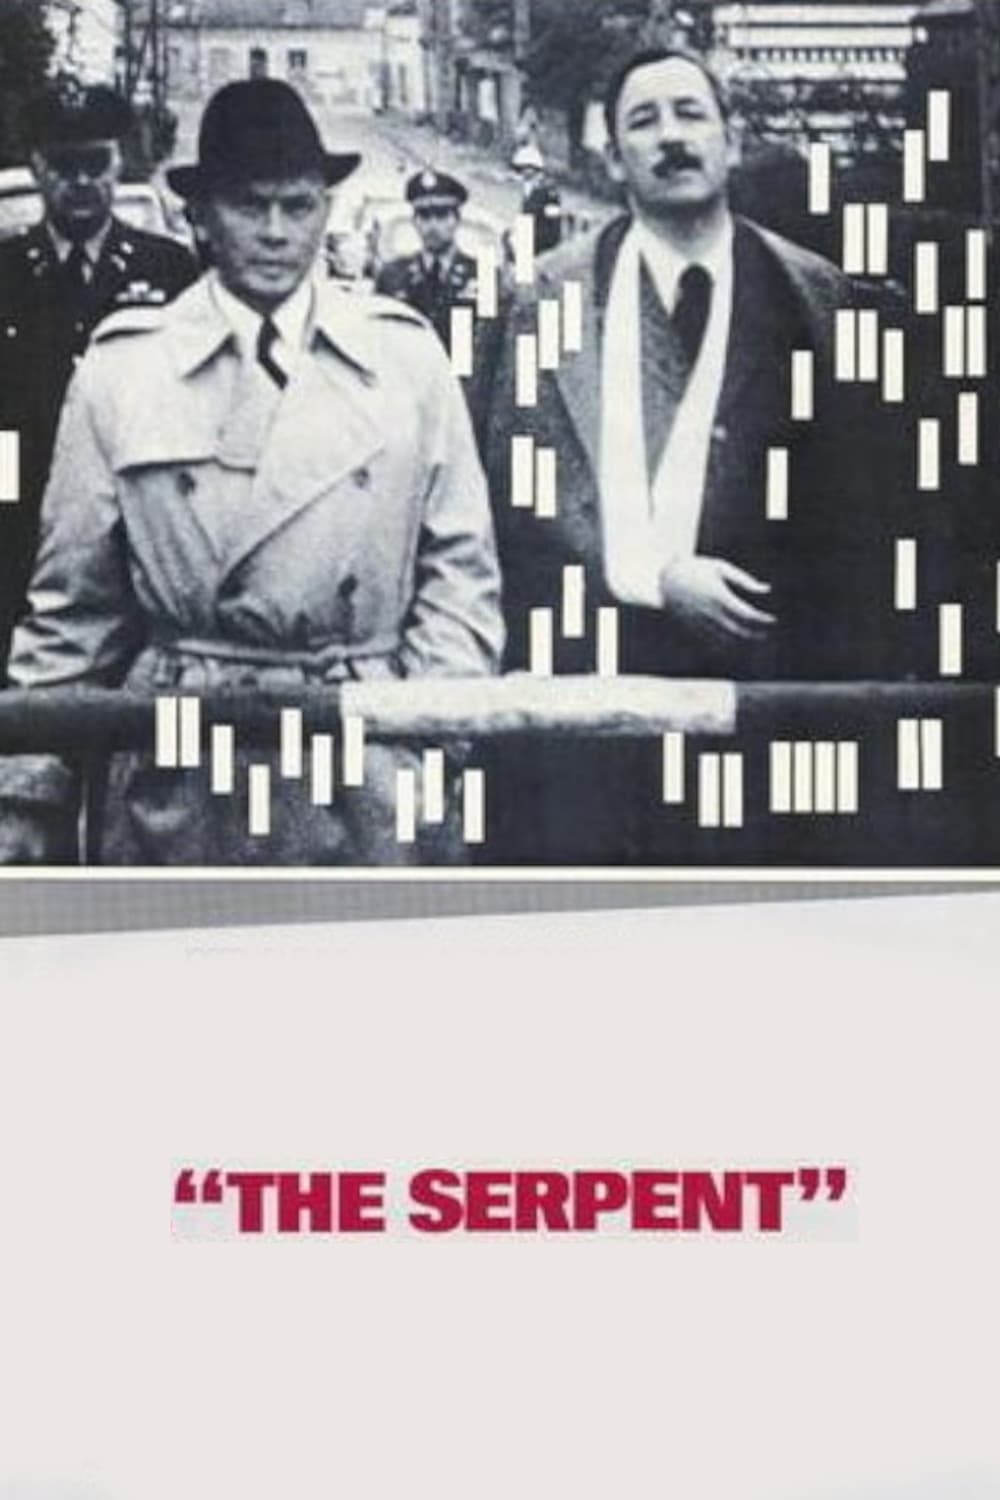 The Serpent